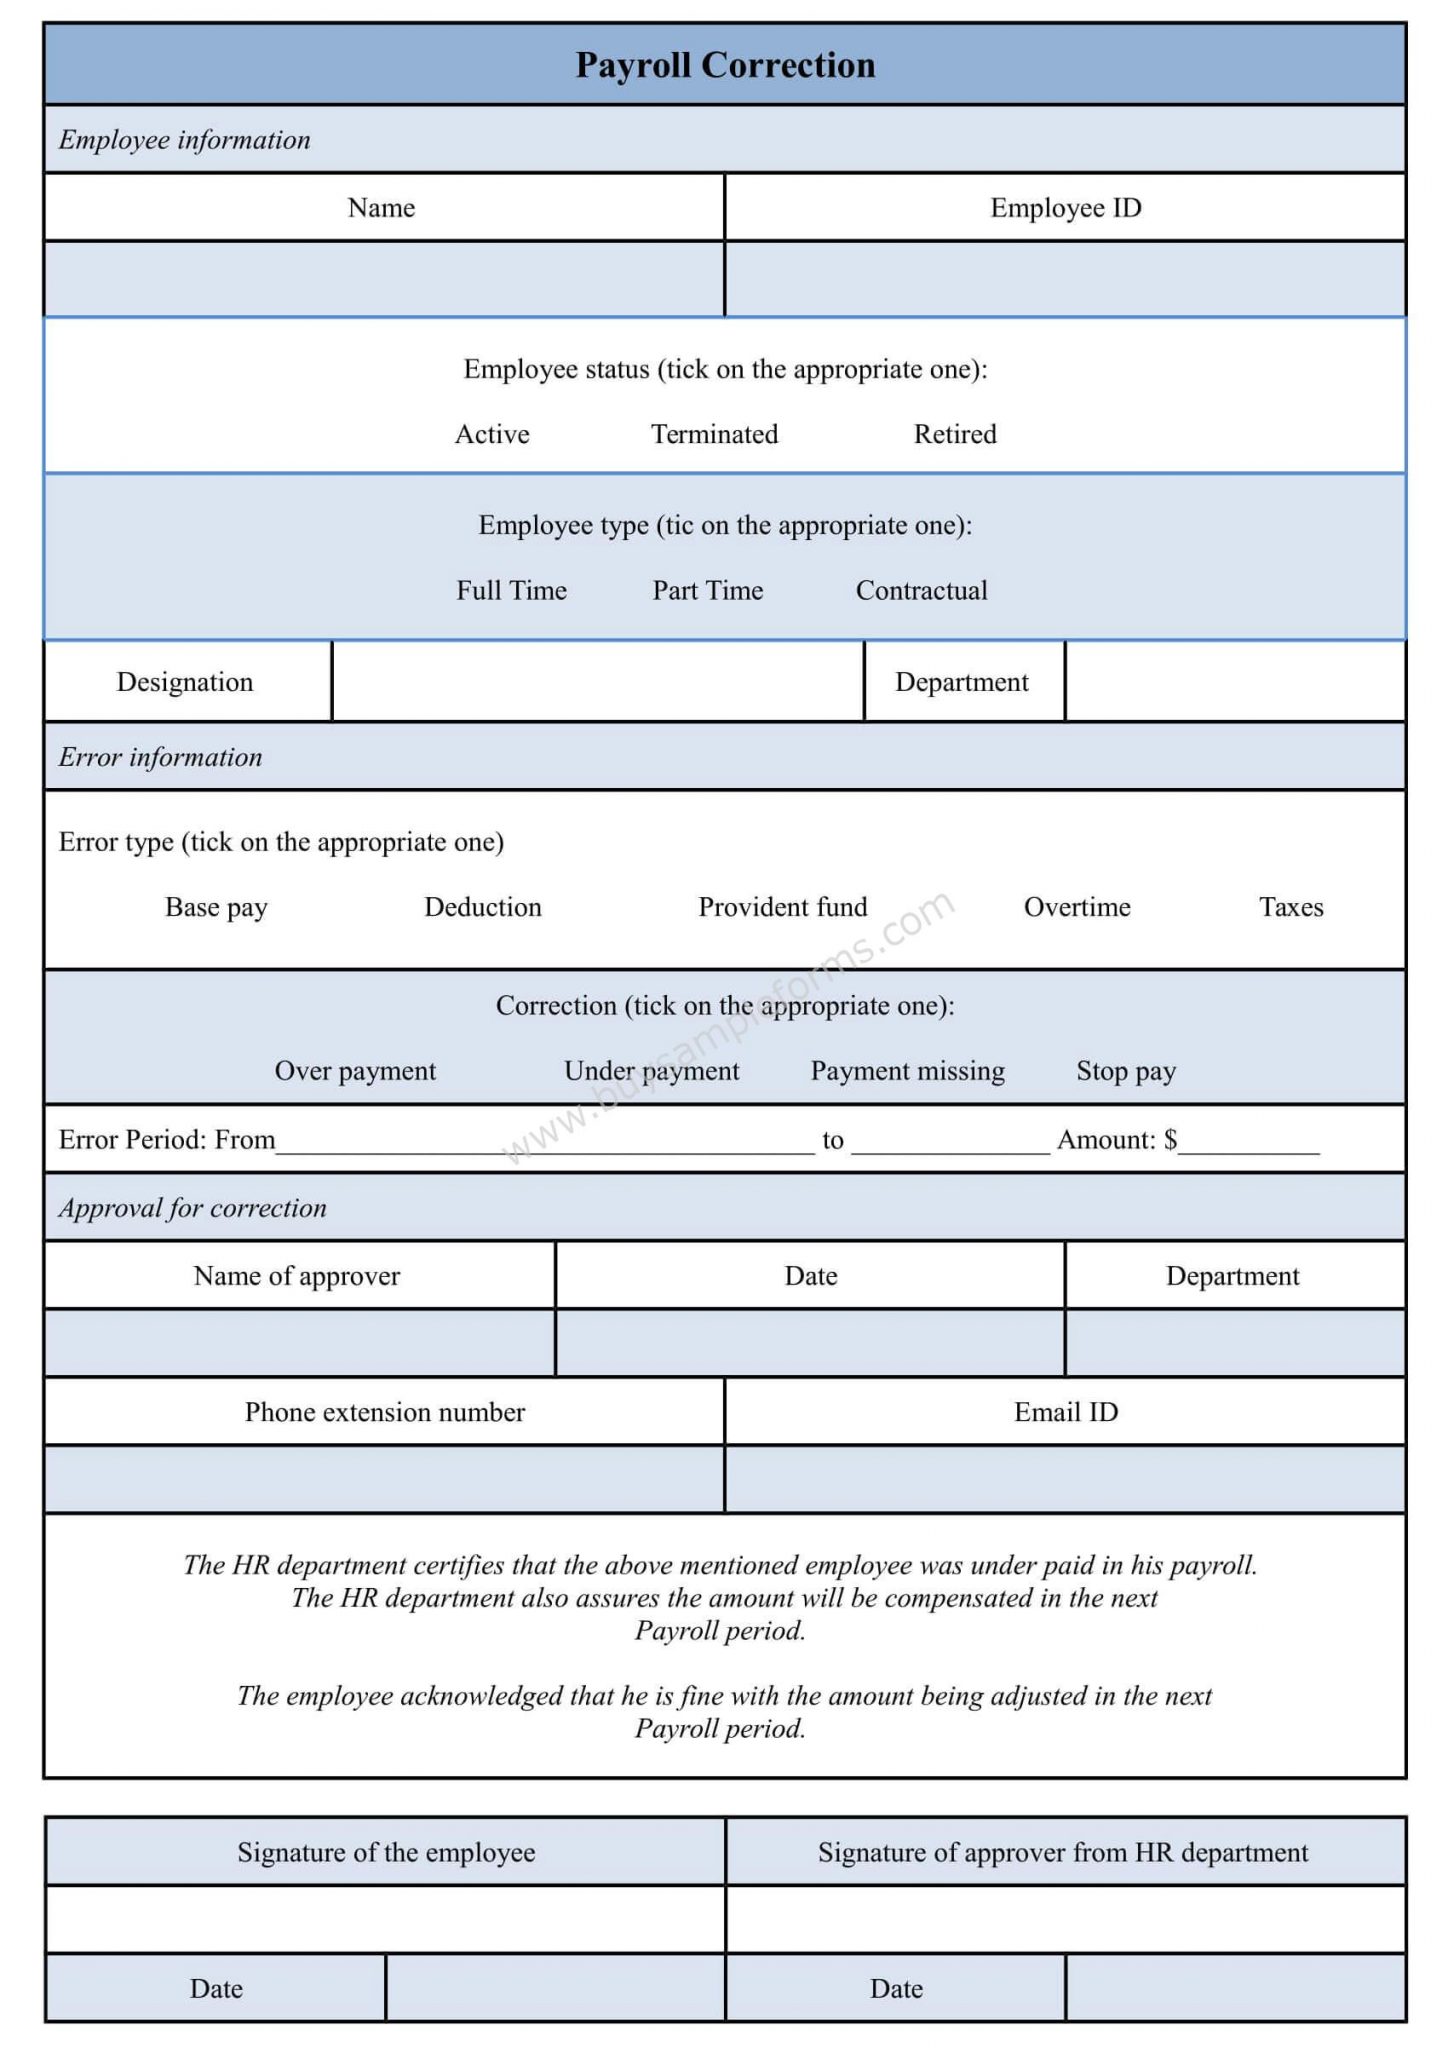 Sample payroll correction form template